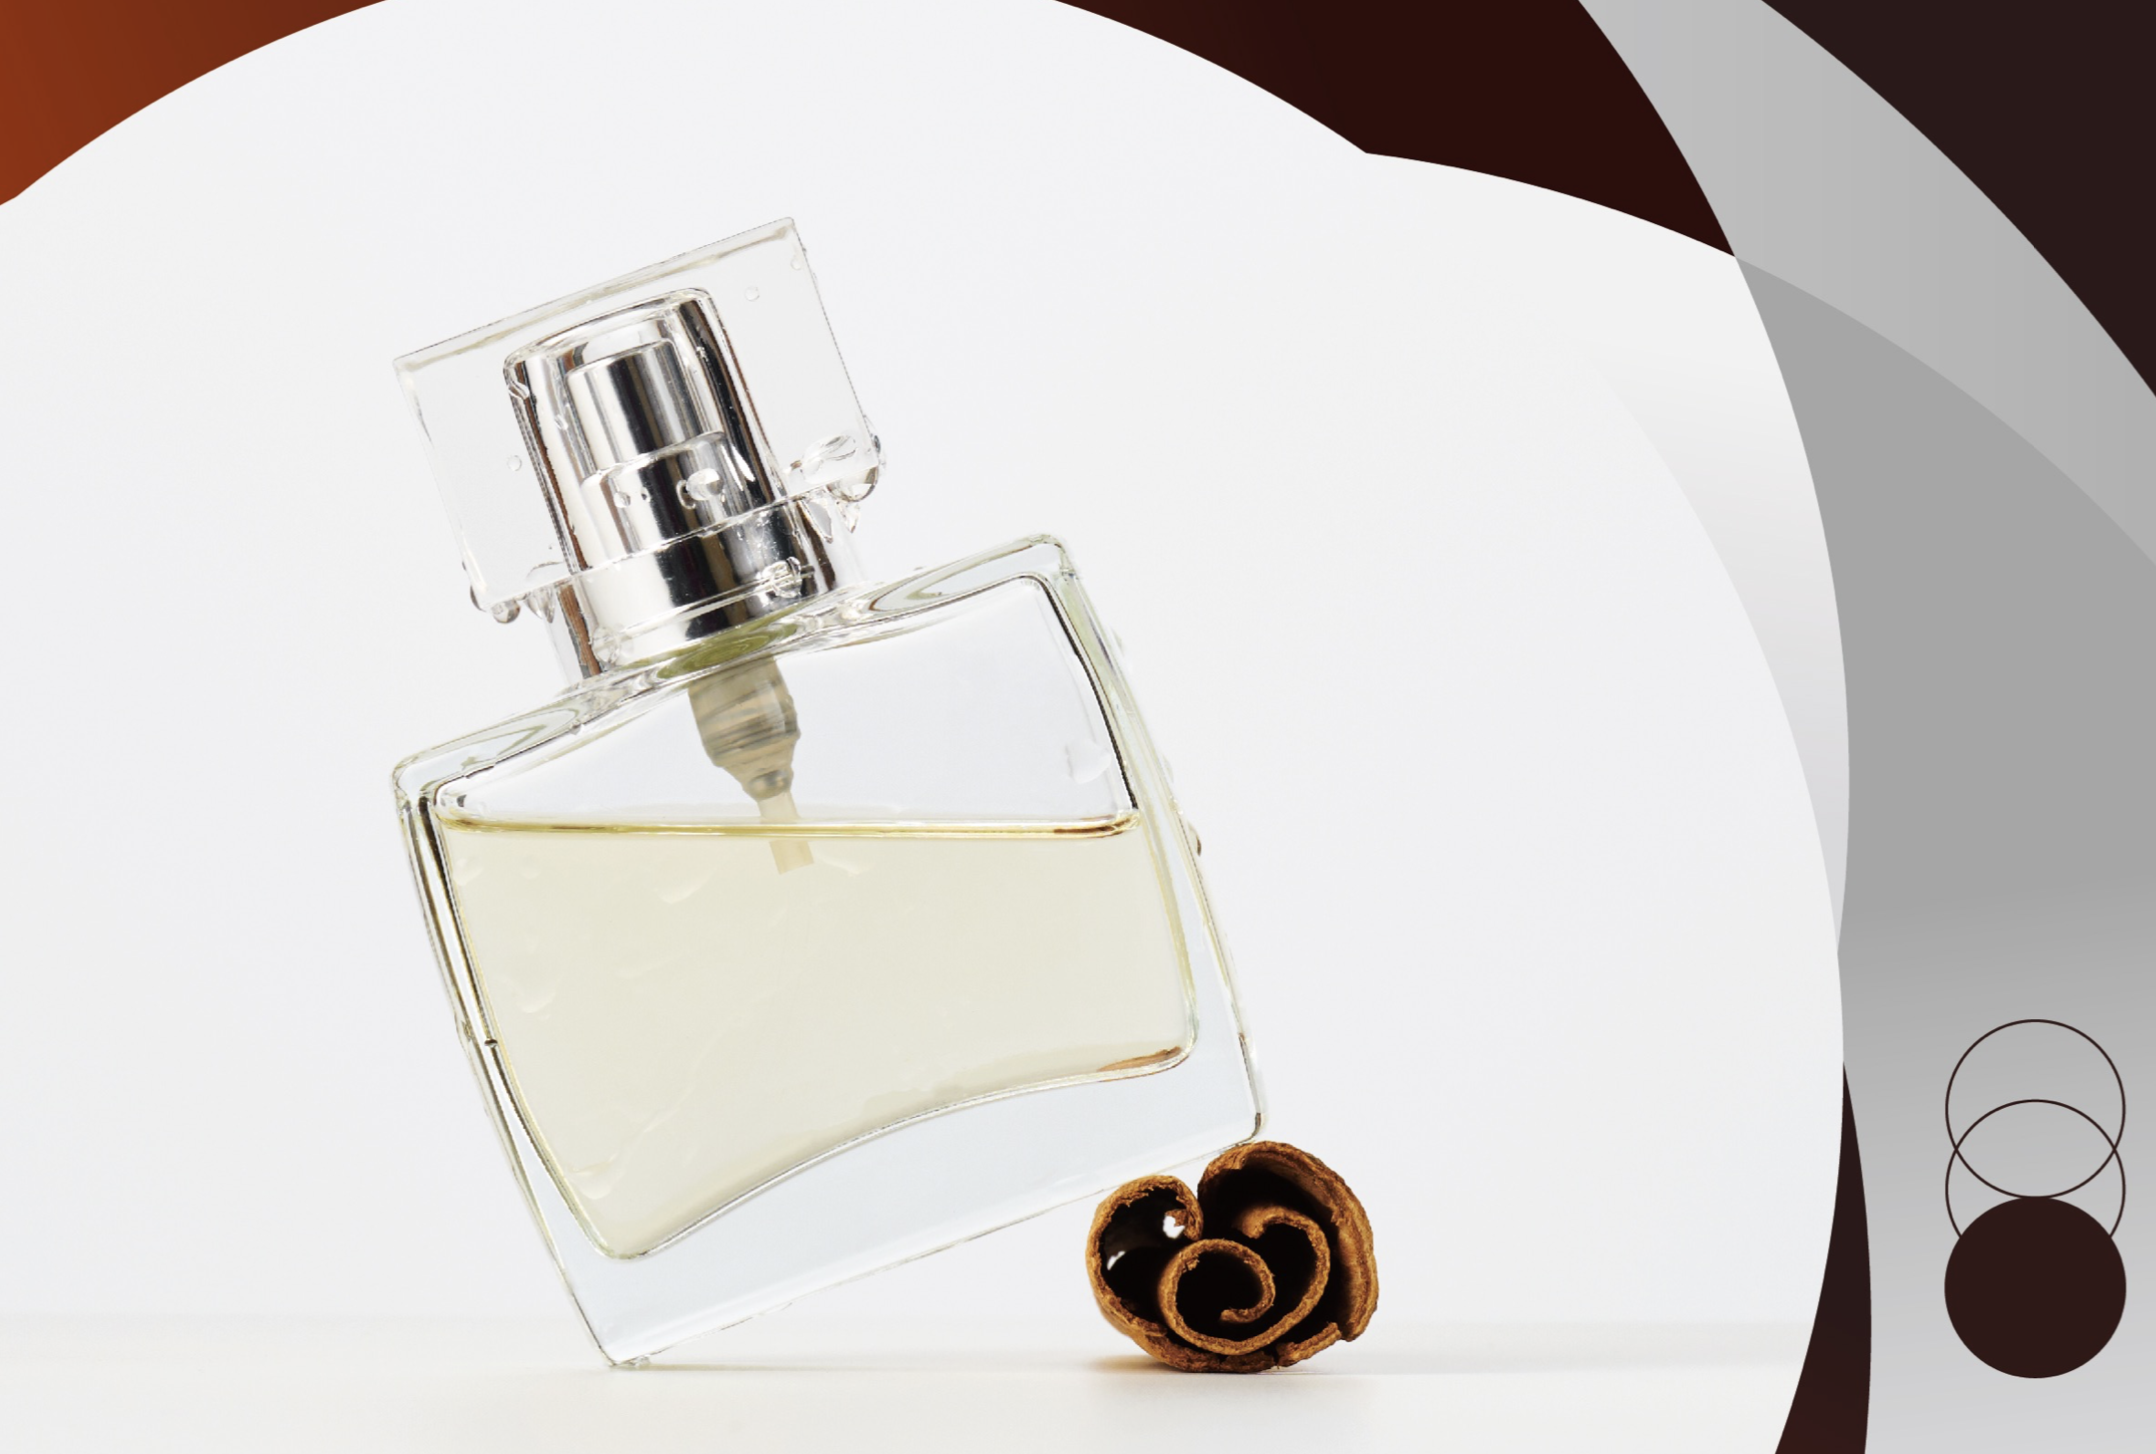 Luxe.CO Intelligence Online Forum: “Why is high-end fragrance so popular in China?”